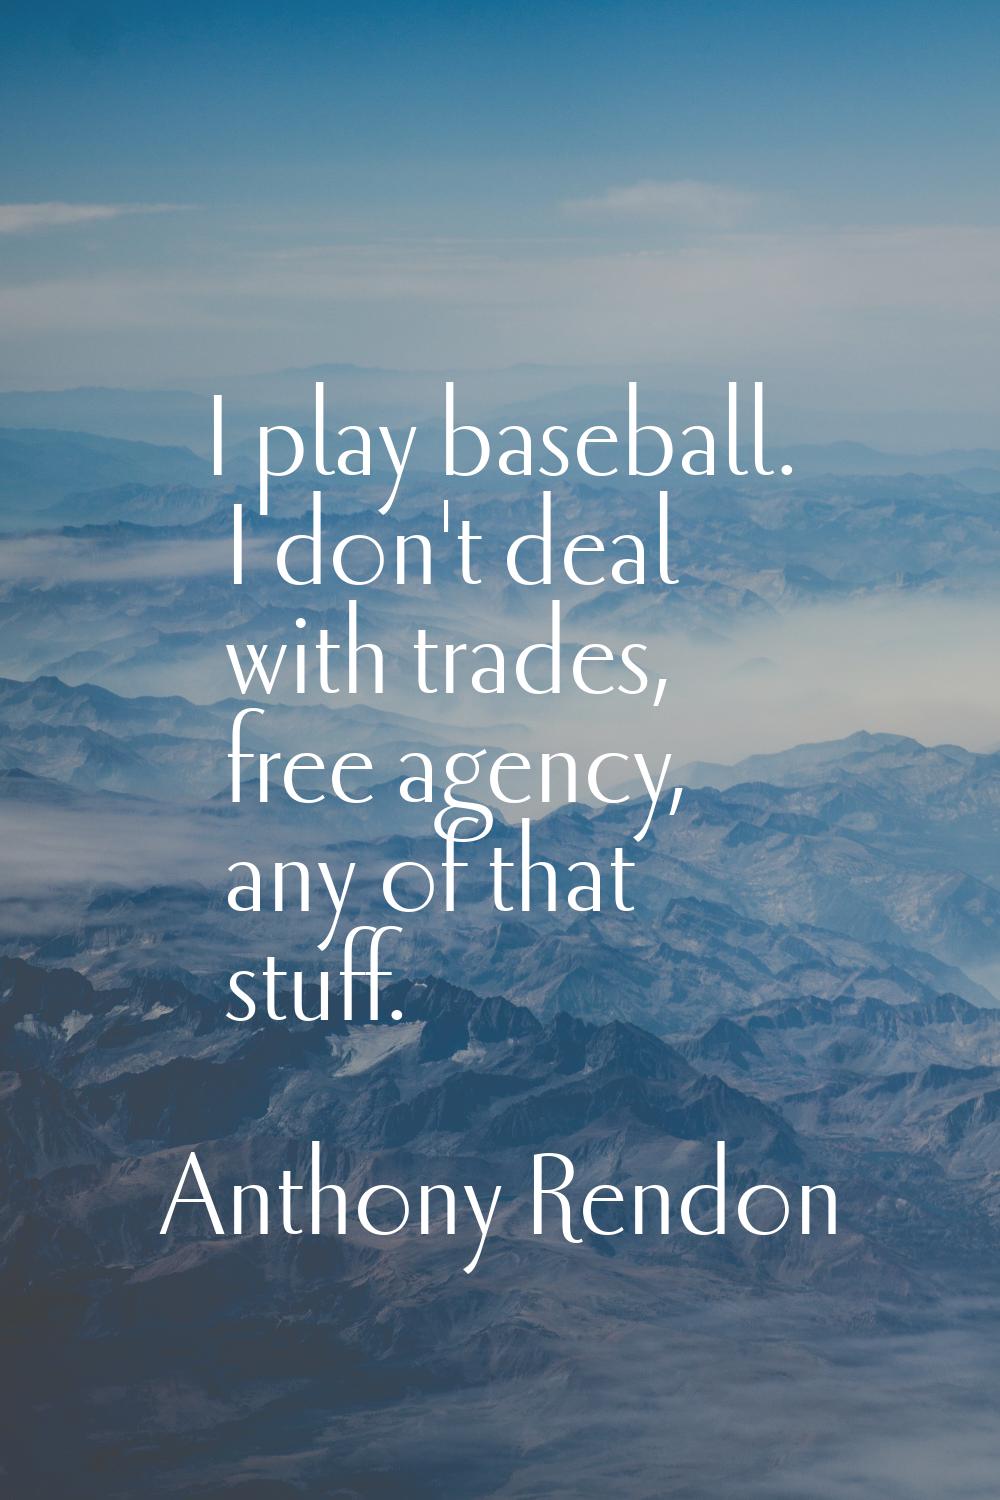 I play baseball. I don't deal with trades, free agency, any of that stuff.